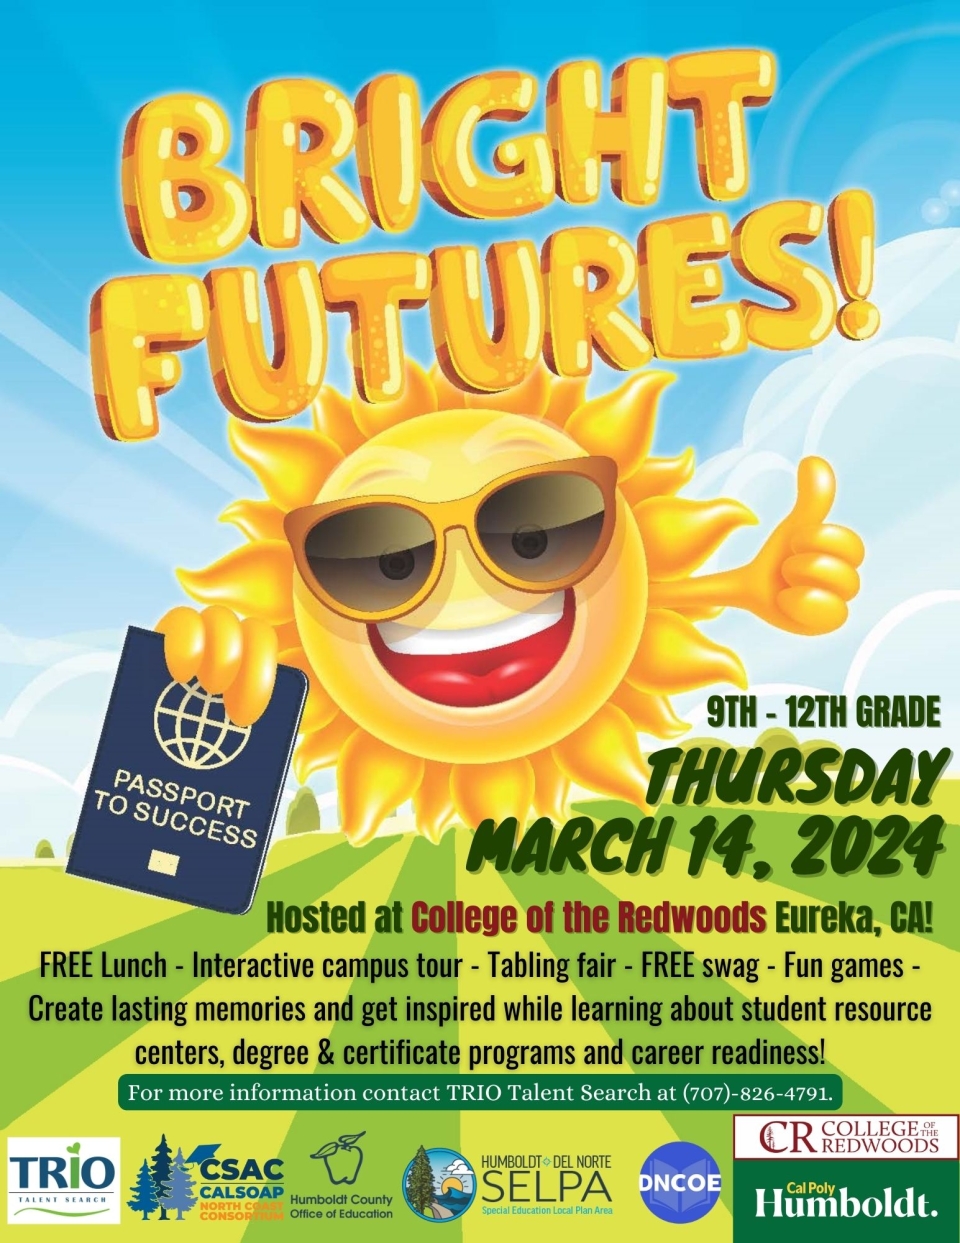 Event flyer for Bright Futures hosted at College of the Redwoods on March 14.